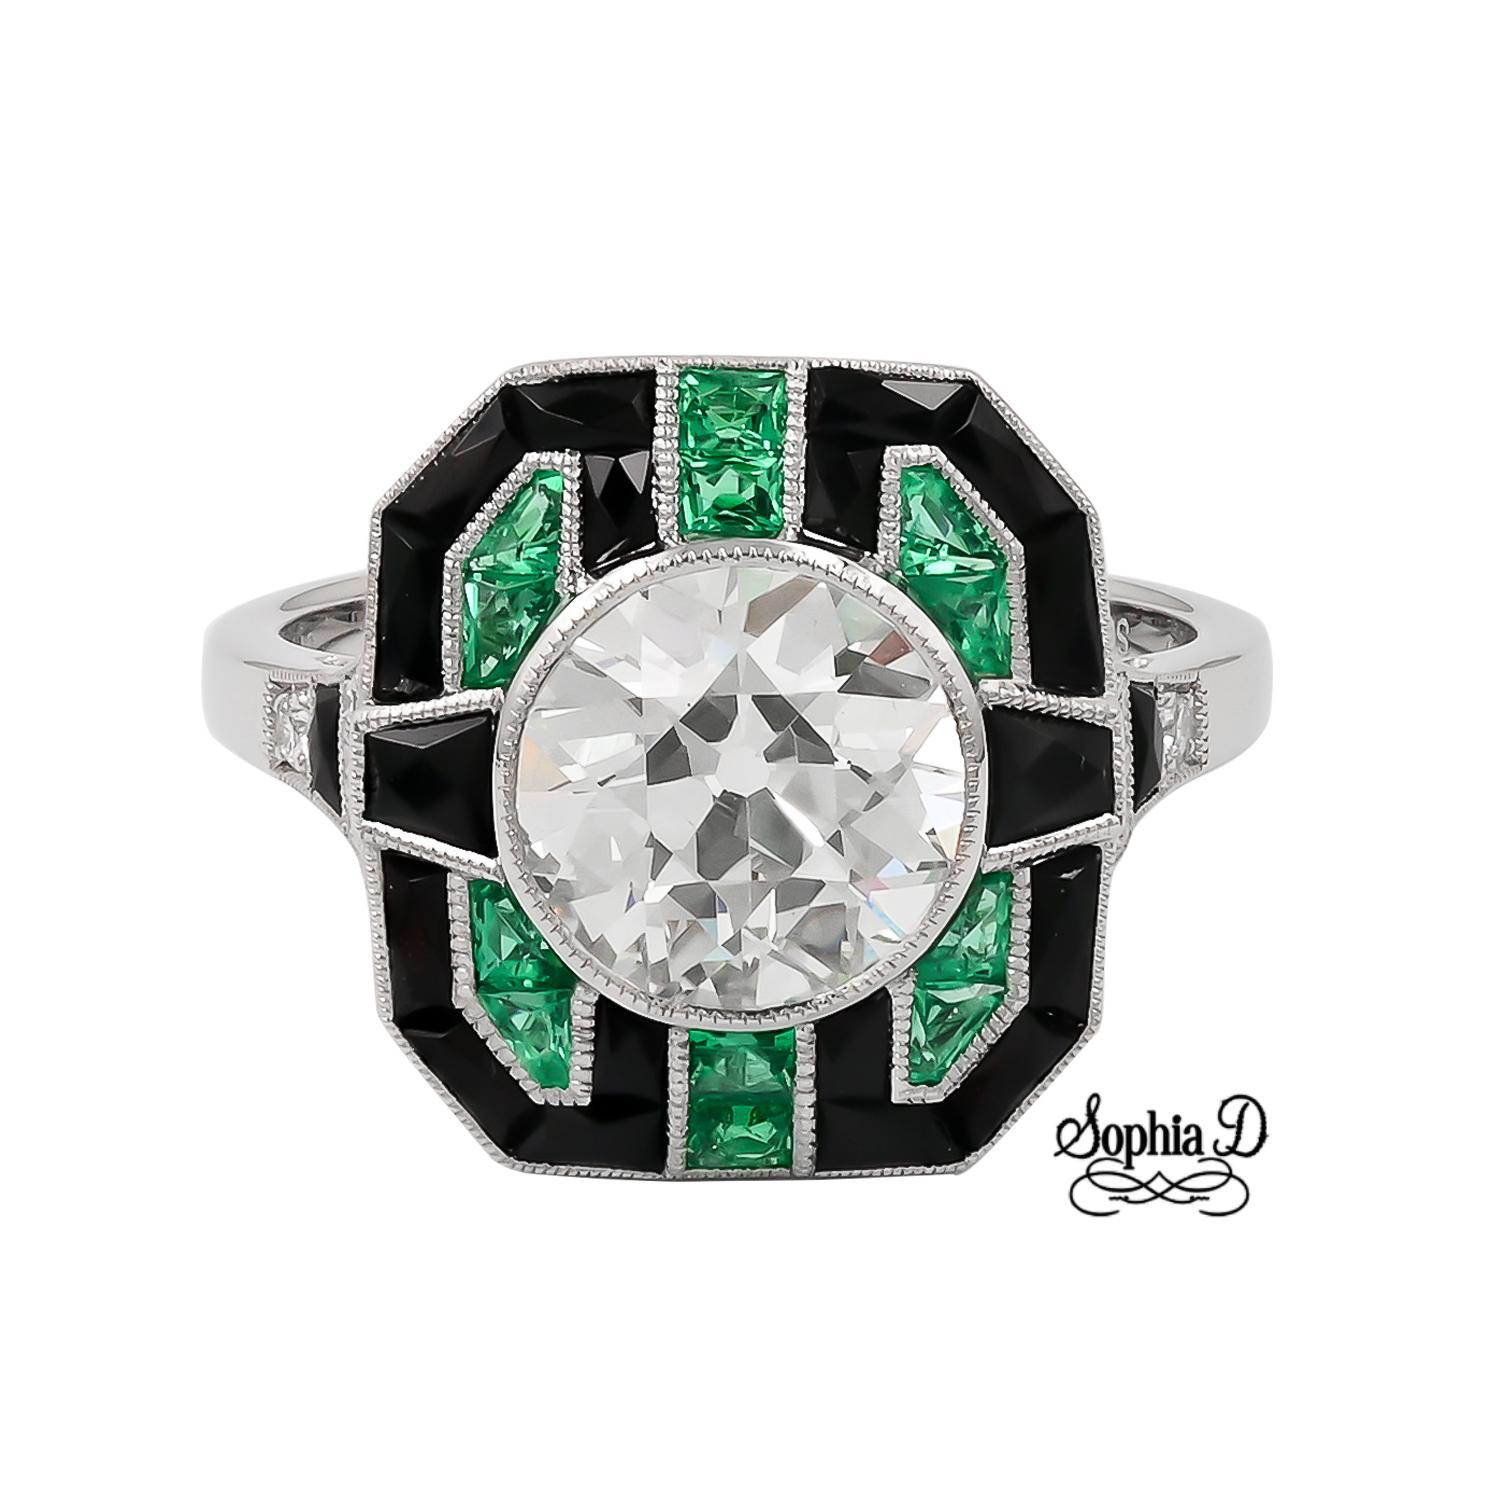 Sophia D ring composed of diamonds, onyx, and emeralds. It features a round cut diamond center that weighs approximately 1.94 carats and is accented with 0.95 carats onyx and .30 carats emerald in platinum setting.

The ring size is 6.5 and